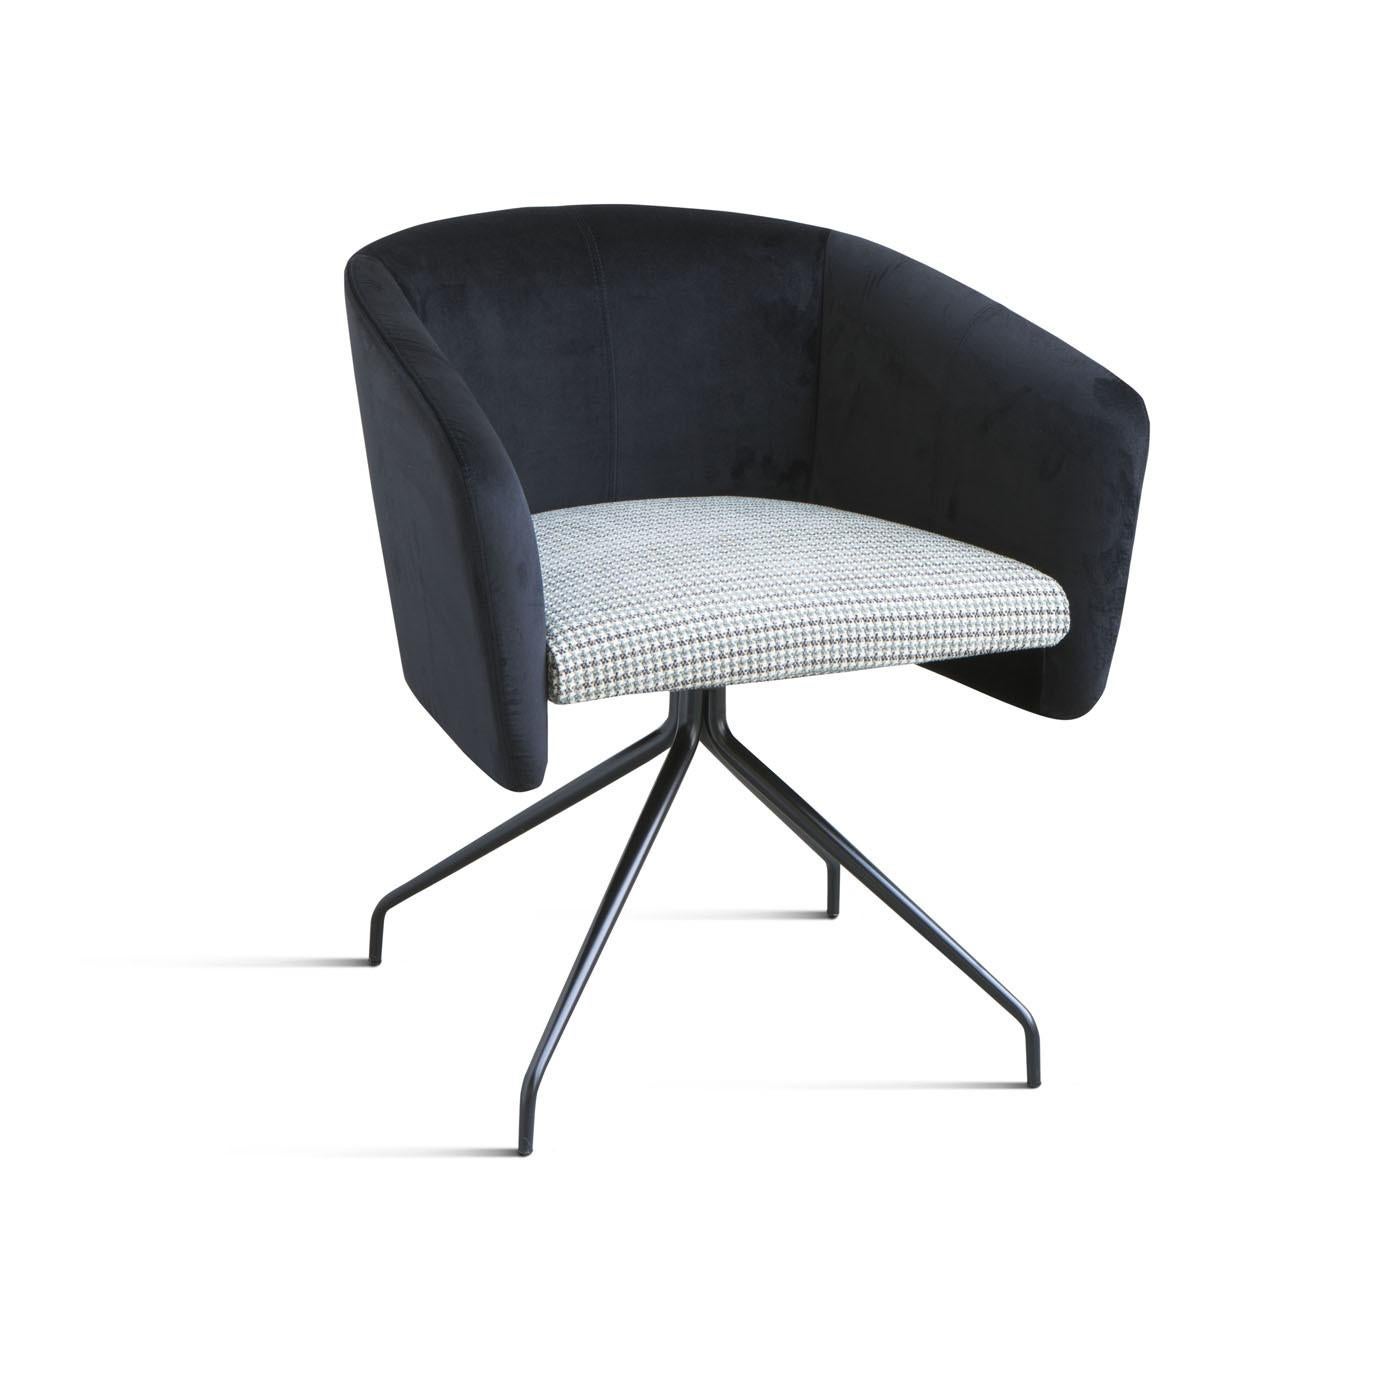 This chair is the office version of the exquisite Balù collection designed by Emilio Nanni. Elegant and refined, it features a metal swiveling base with four spokes, and an enveloping blue velvet backrest enclosing a soft fabric seat padded with